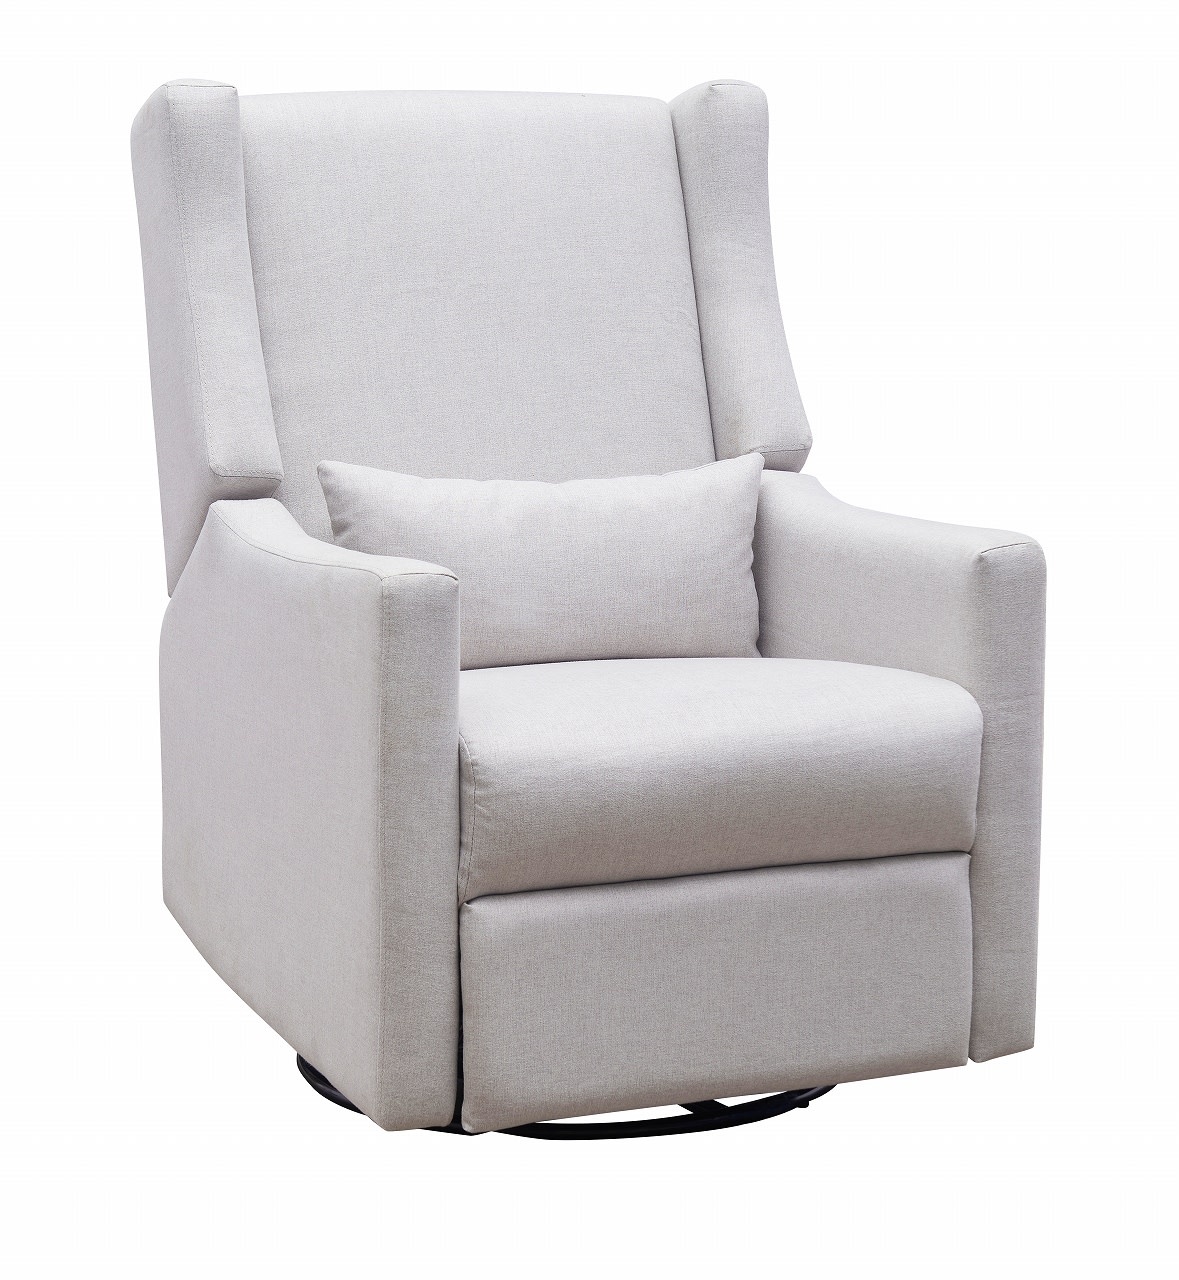 Cocoon Cocoon Bondi Electric Recliner & Glider Chair with USB in Mist Grey